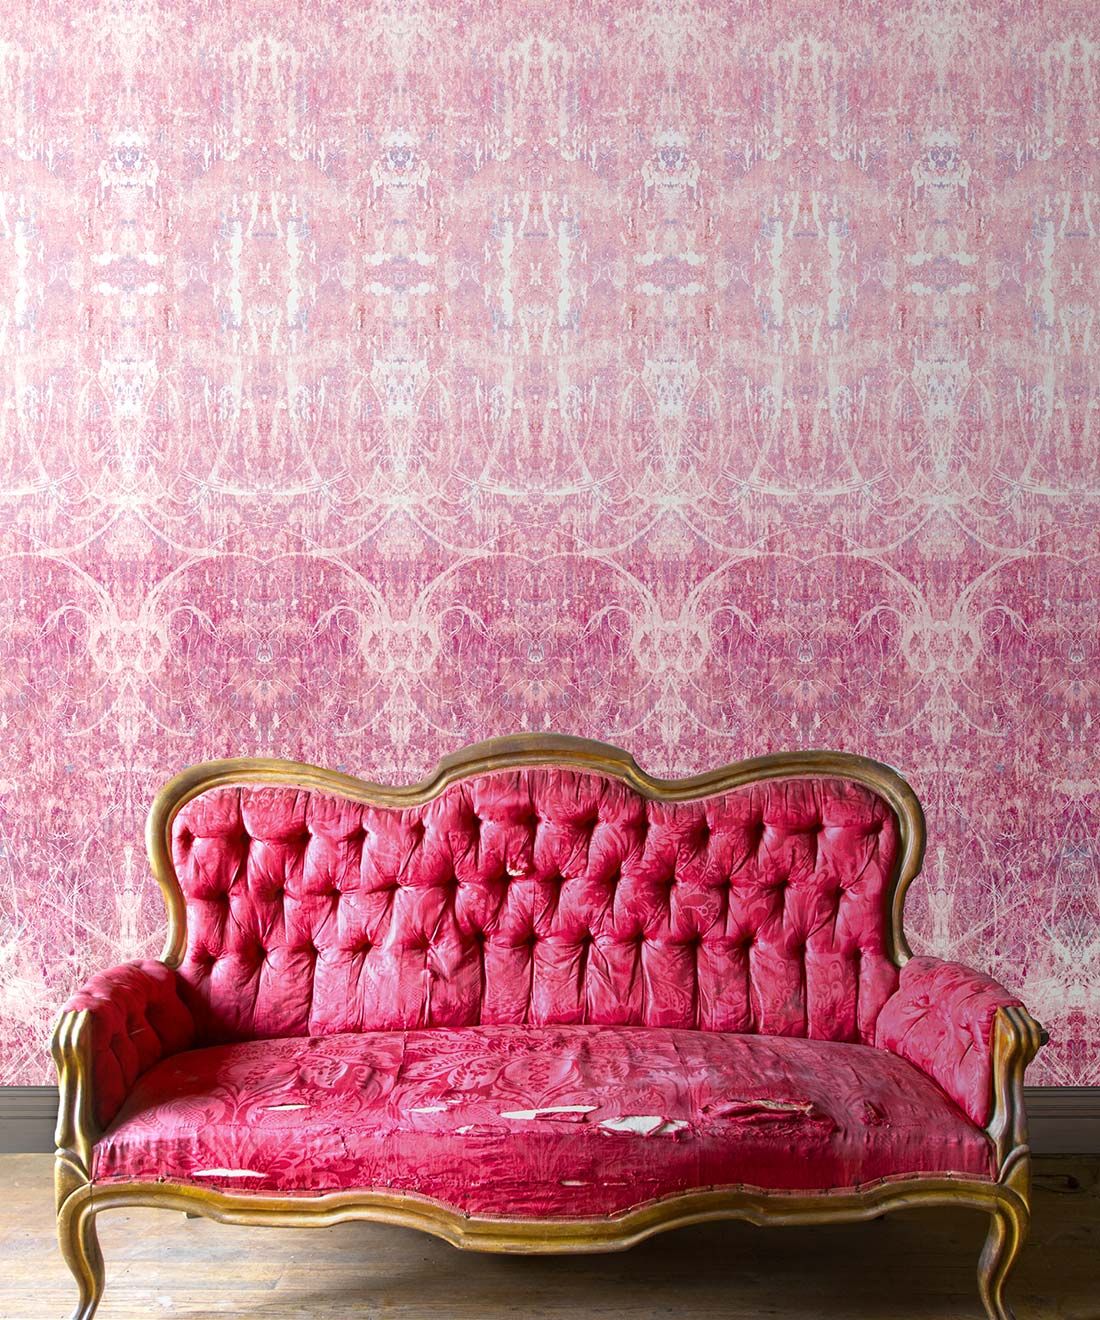 Hori Wallpaper by Simcox • Color Rose • Abstract Wallpaper • insitu with a pink sofa